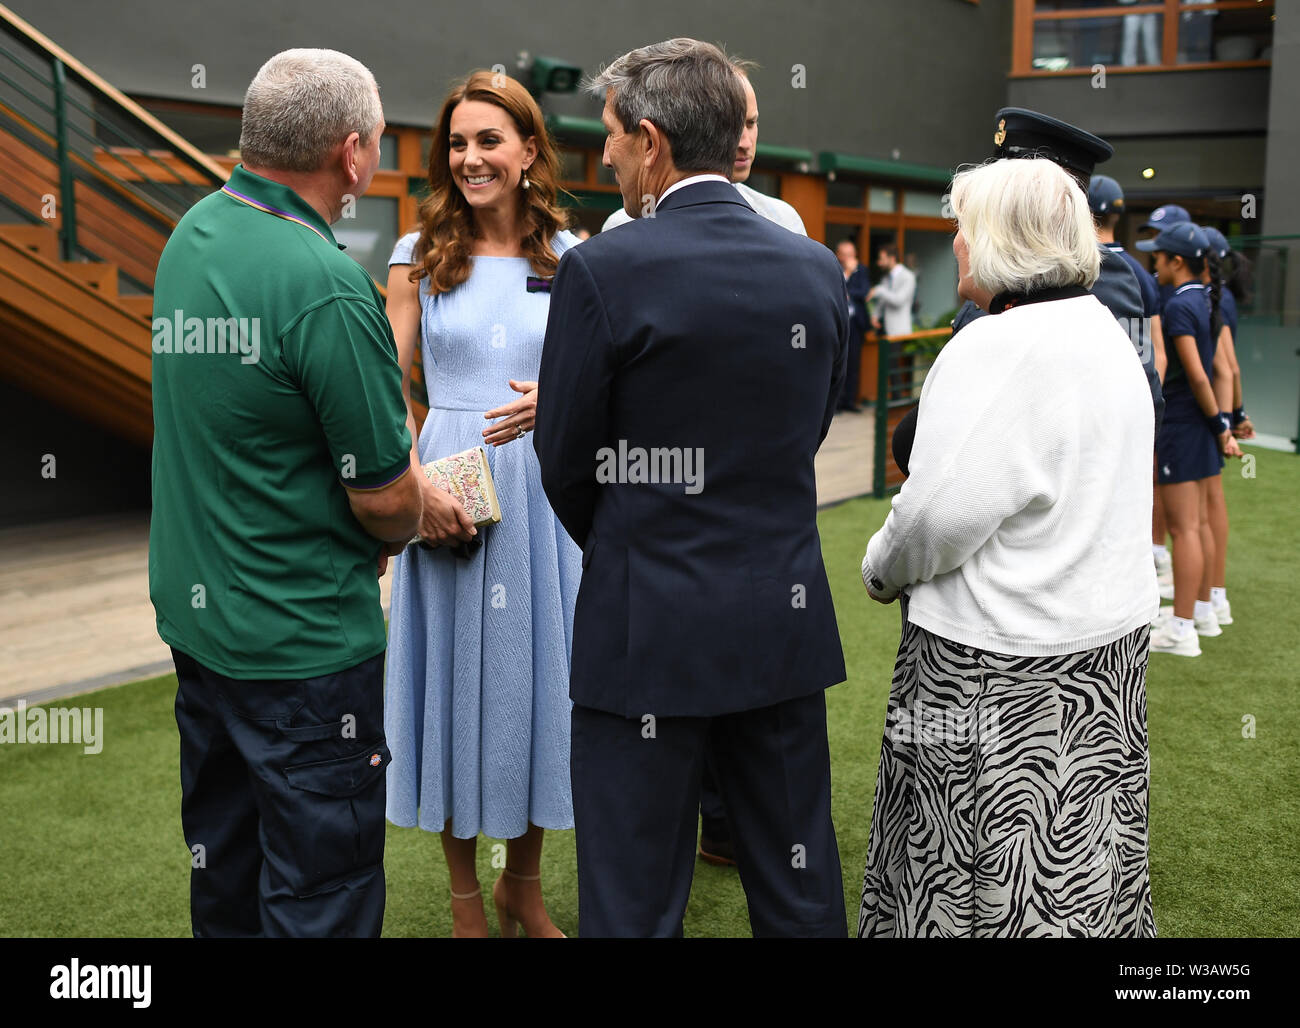 The Duke and Duchess of Cambridge meet (left to right) Mick Woods, from the AELTC facilities management department, referee Andrew Jarrett and Jayne Miller, AELTC ladies dressing room manager, ahead of the Men's Singles Final on day thirteen of the Wimbledon Championships at the All England Lawn Tennis and Croquet Club, Wimbledon. Stock Photo